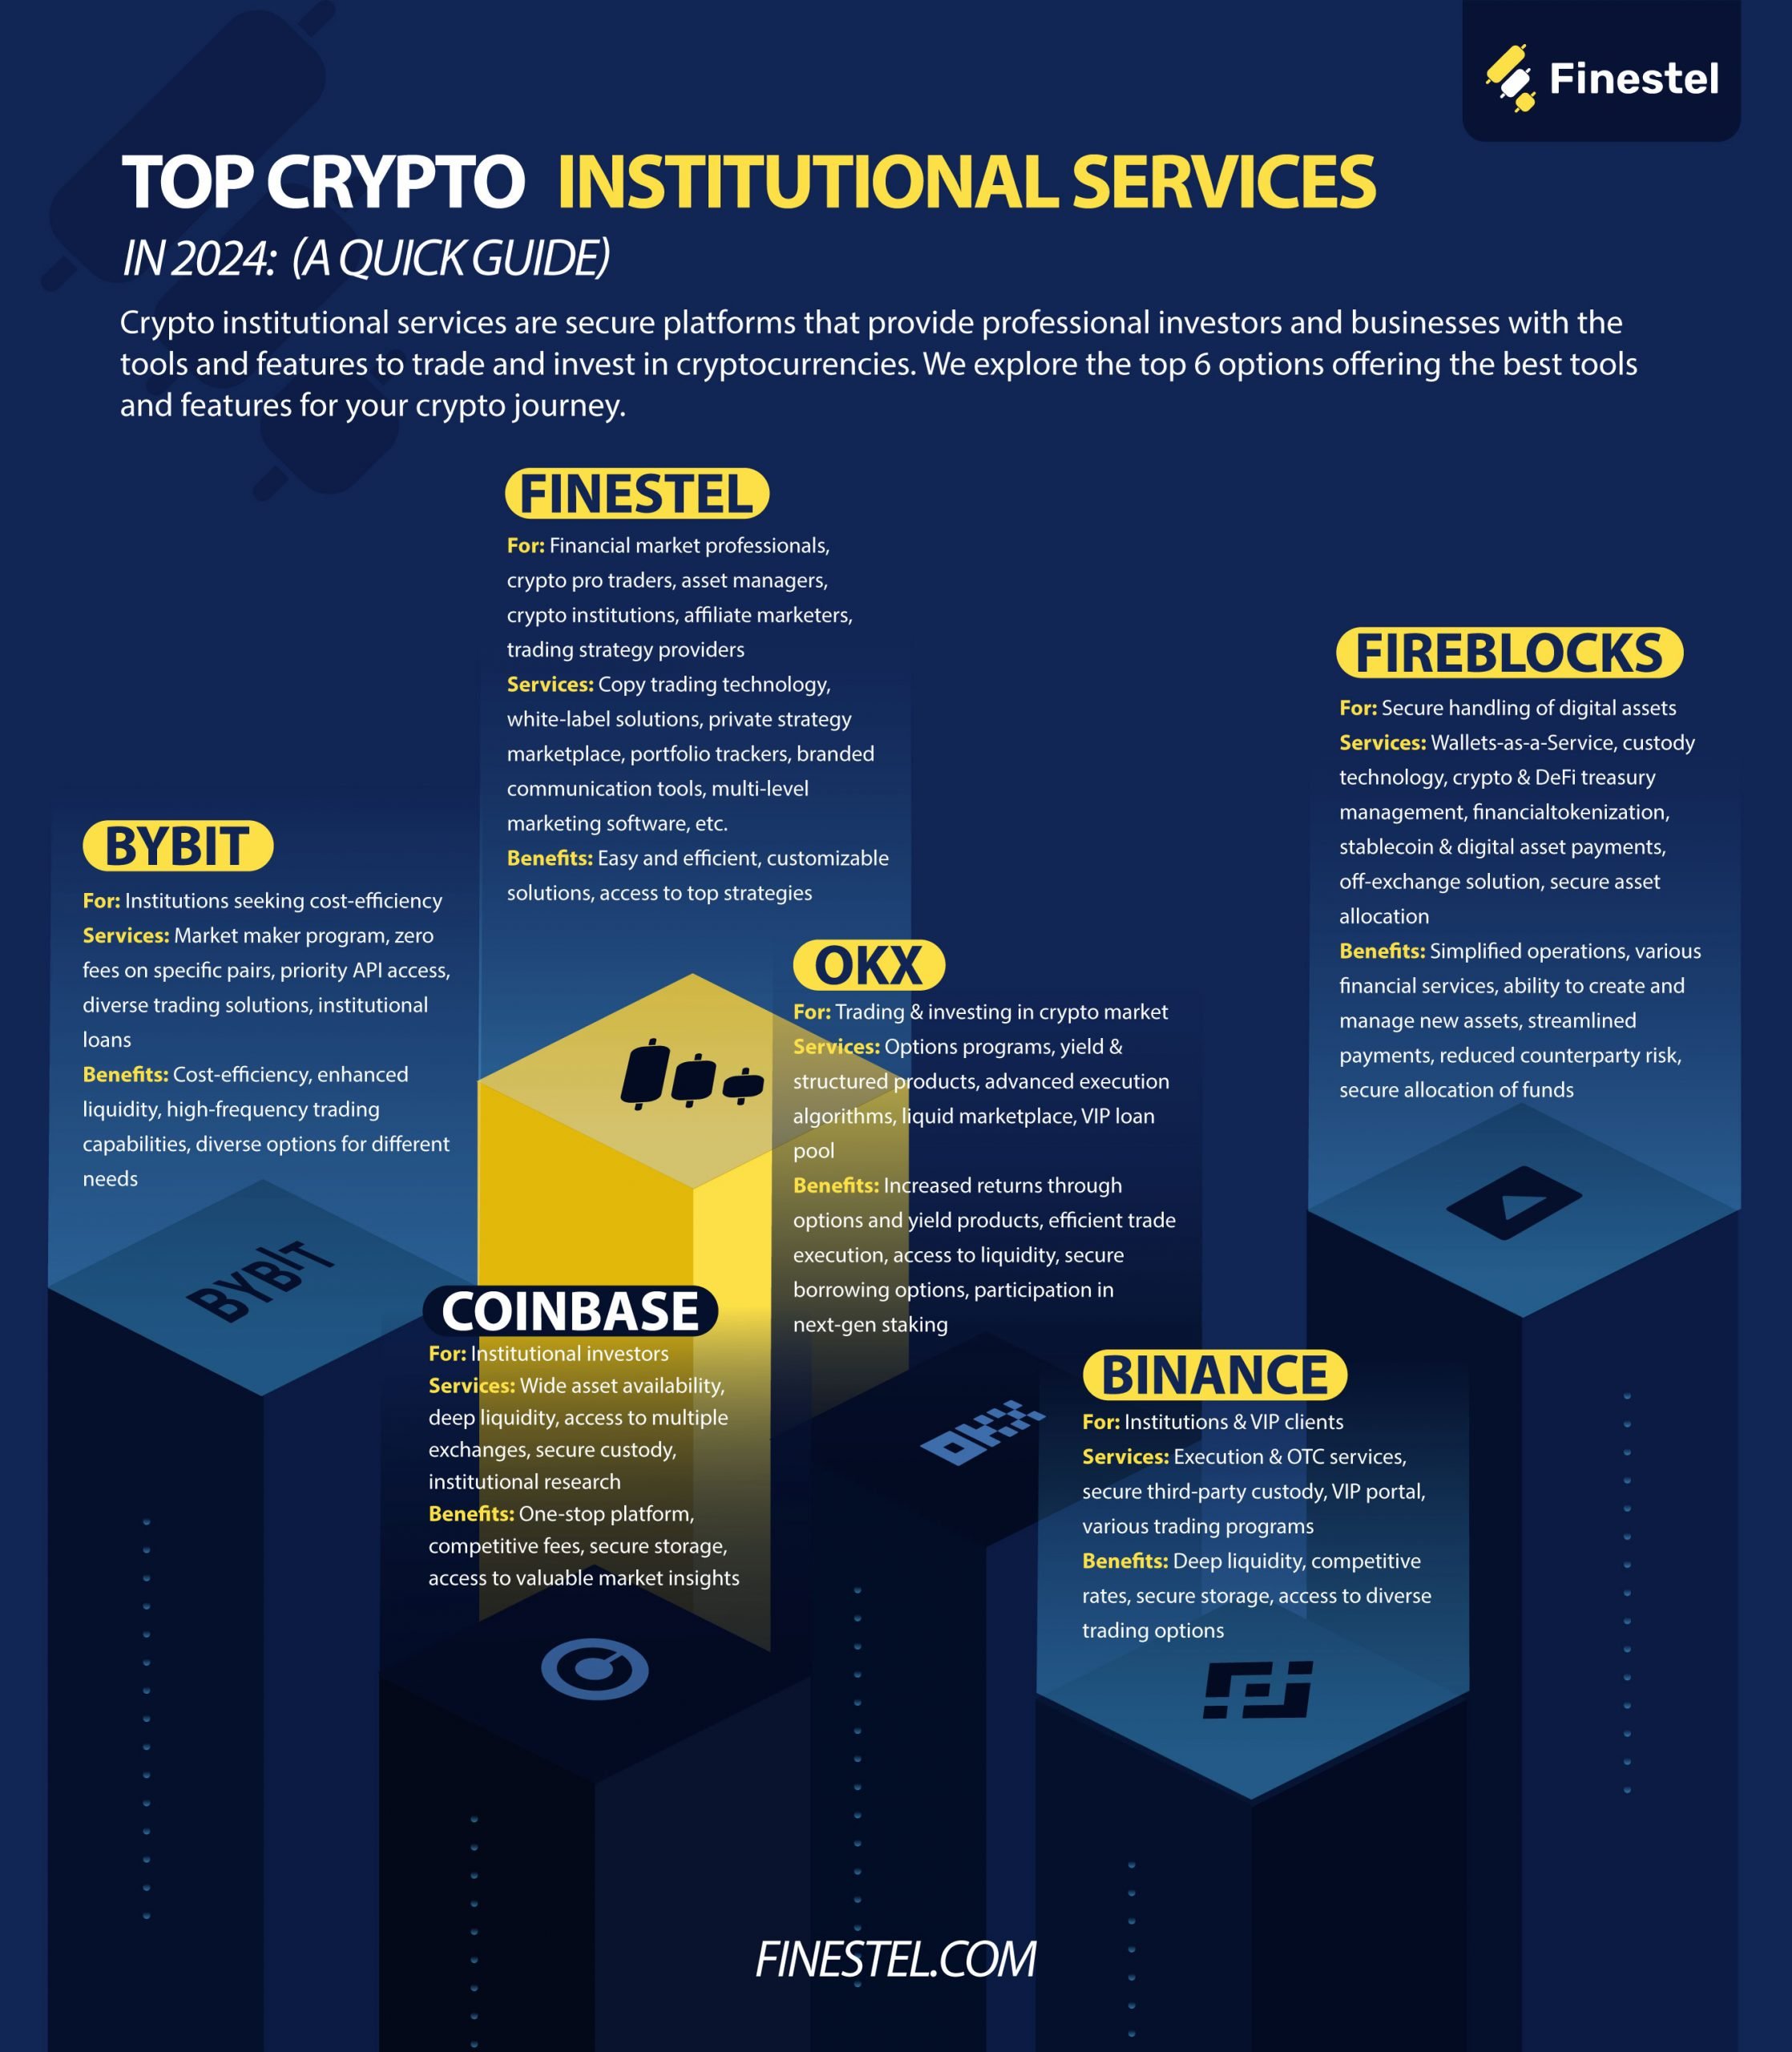 Best Crypto Institutional Services in 2024 Infographic